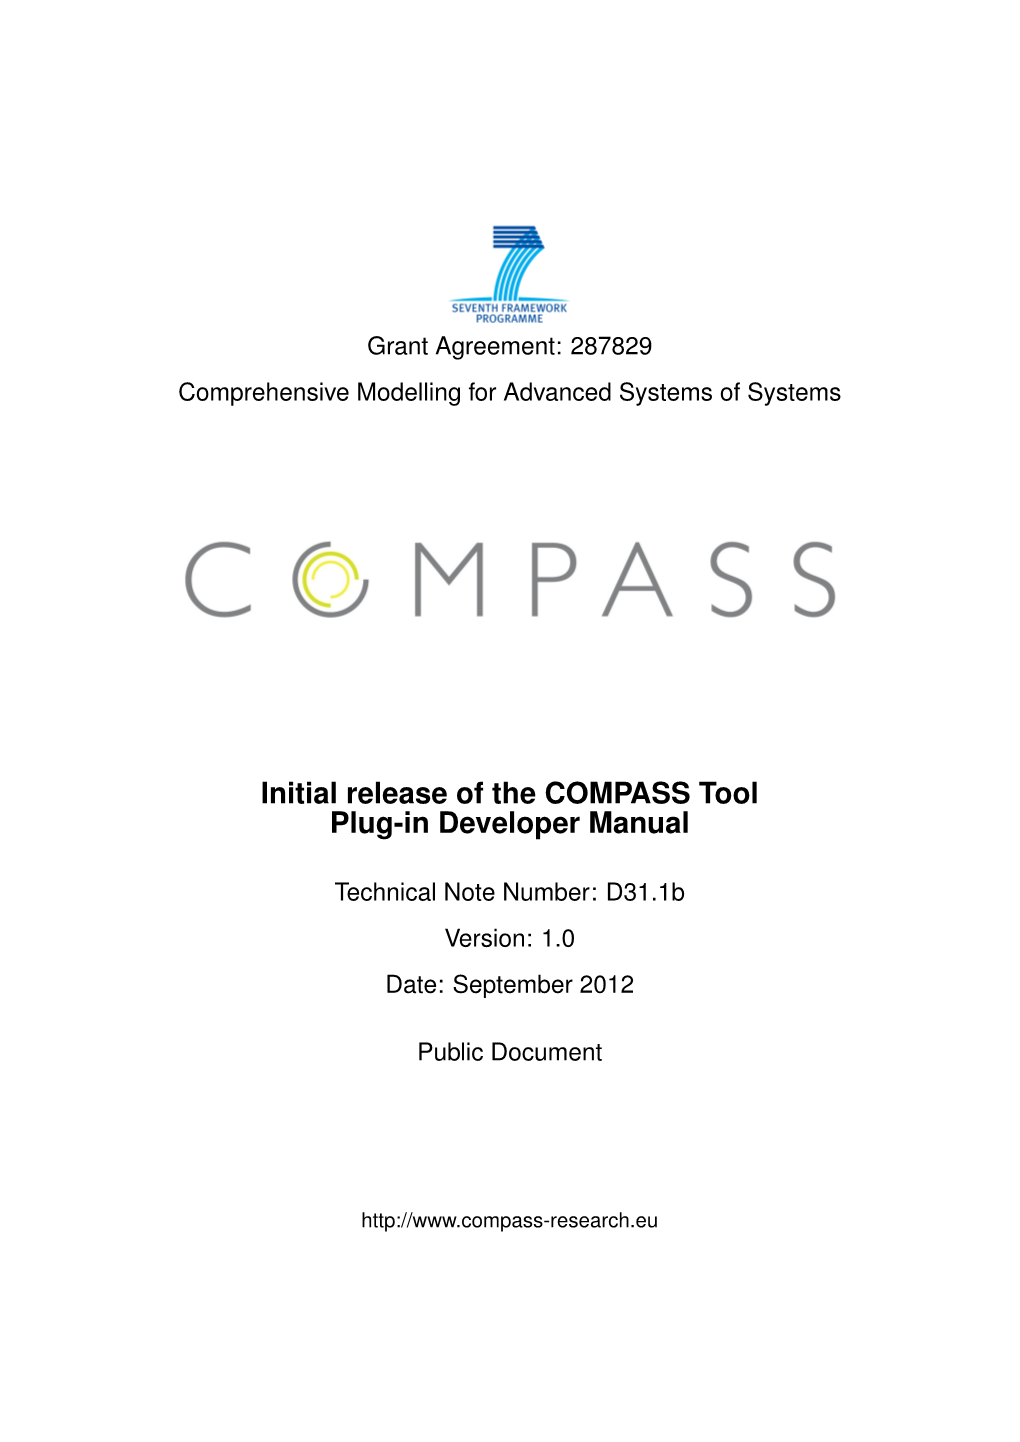 Initial Release of the COMPASS Tool Plug-In Developer Manual